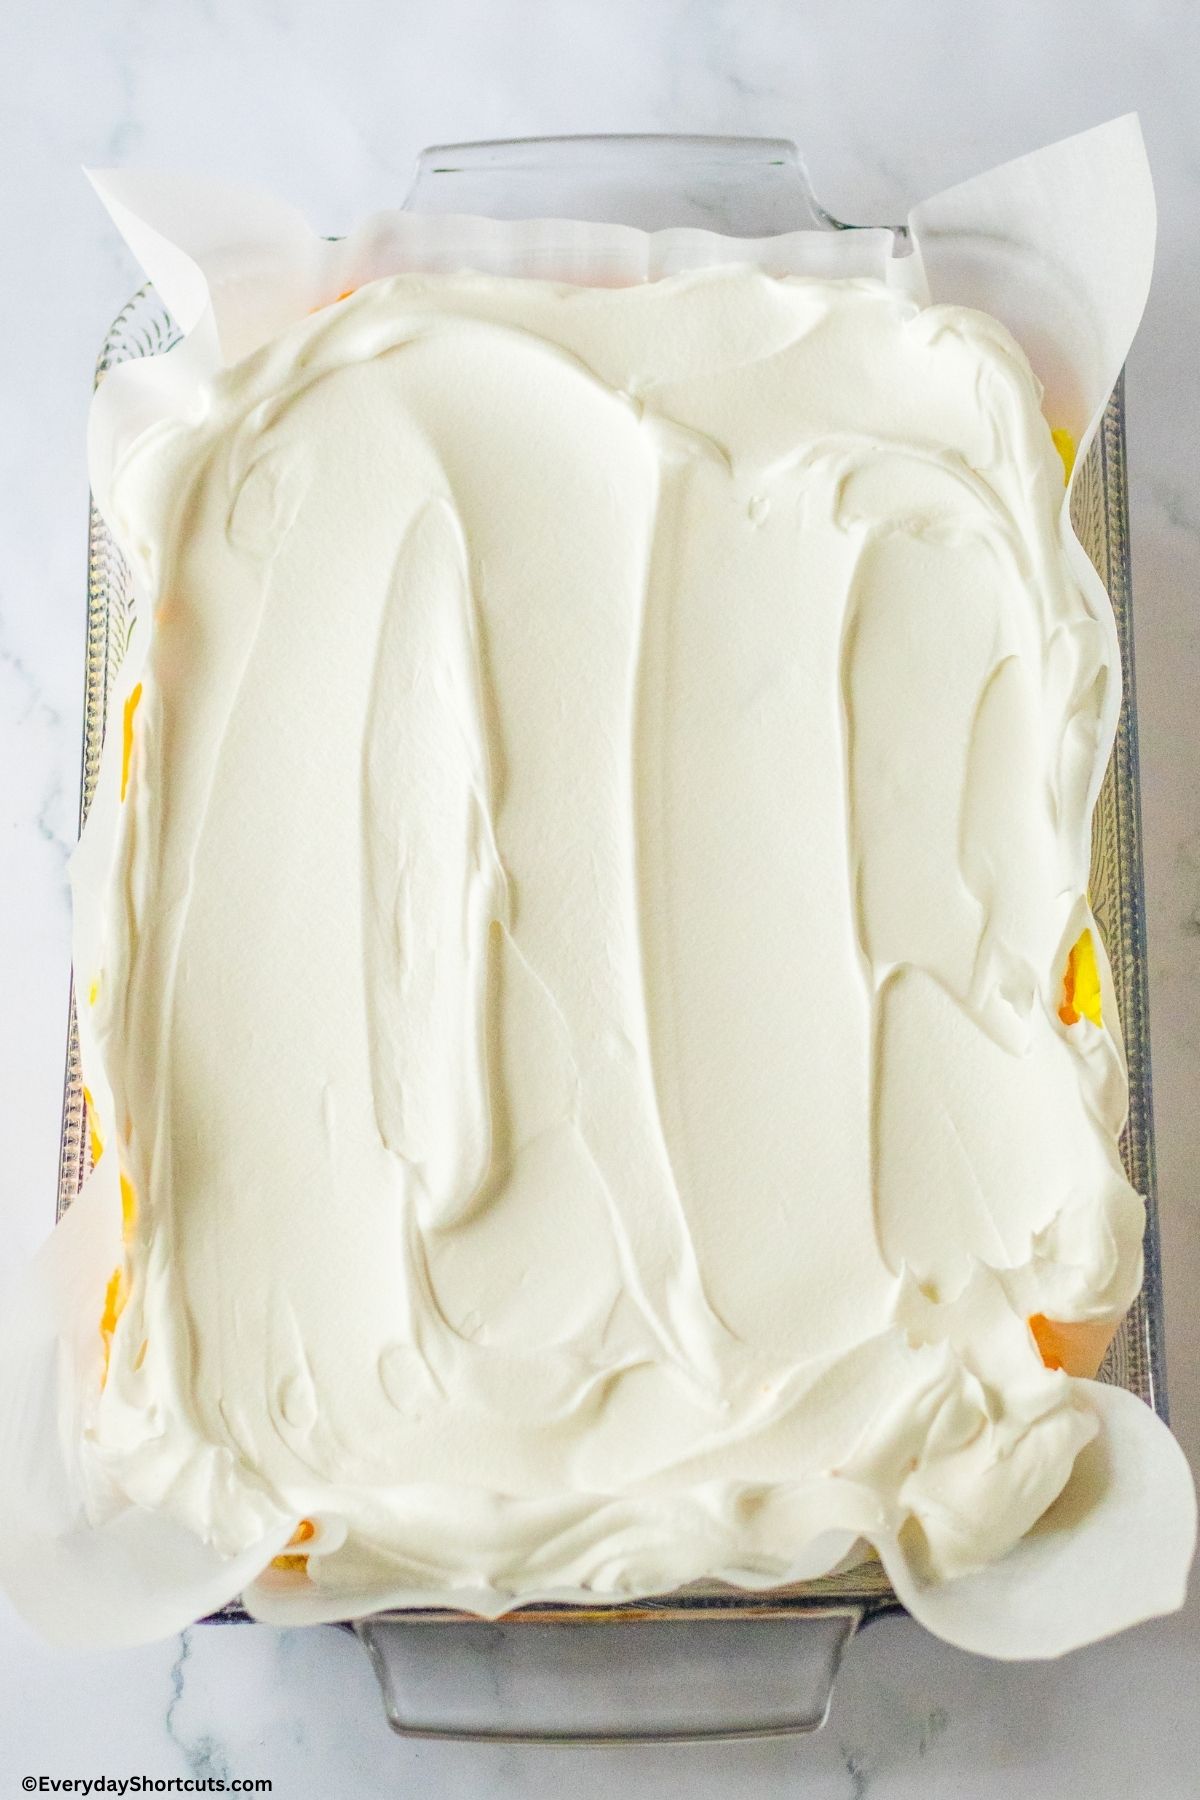 whipped topping on top of layered lush dessert in a baking dish